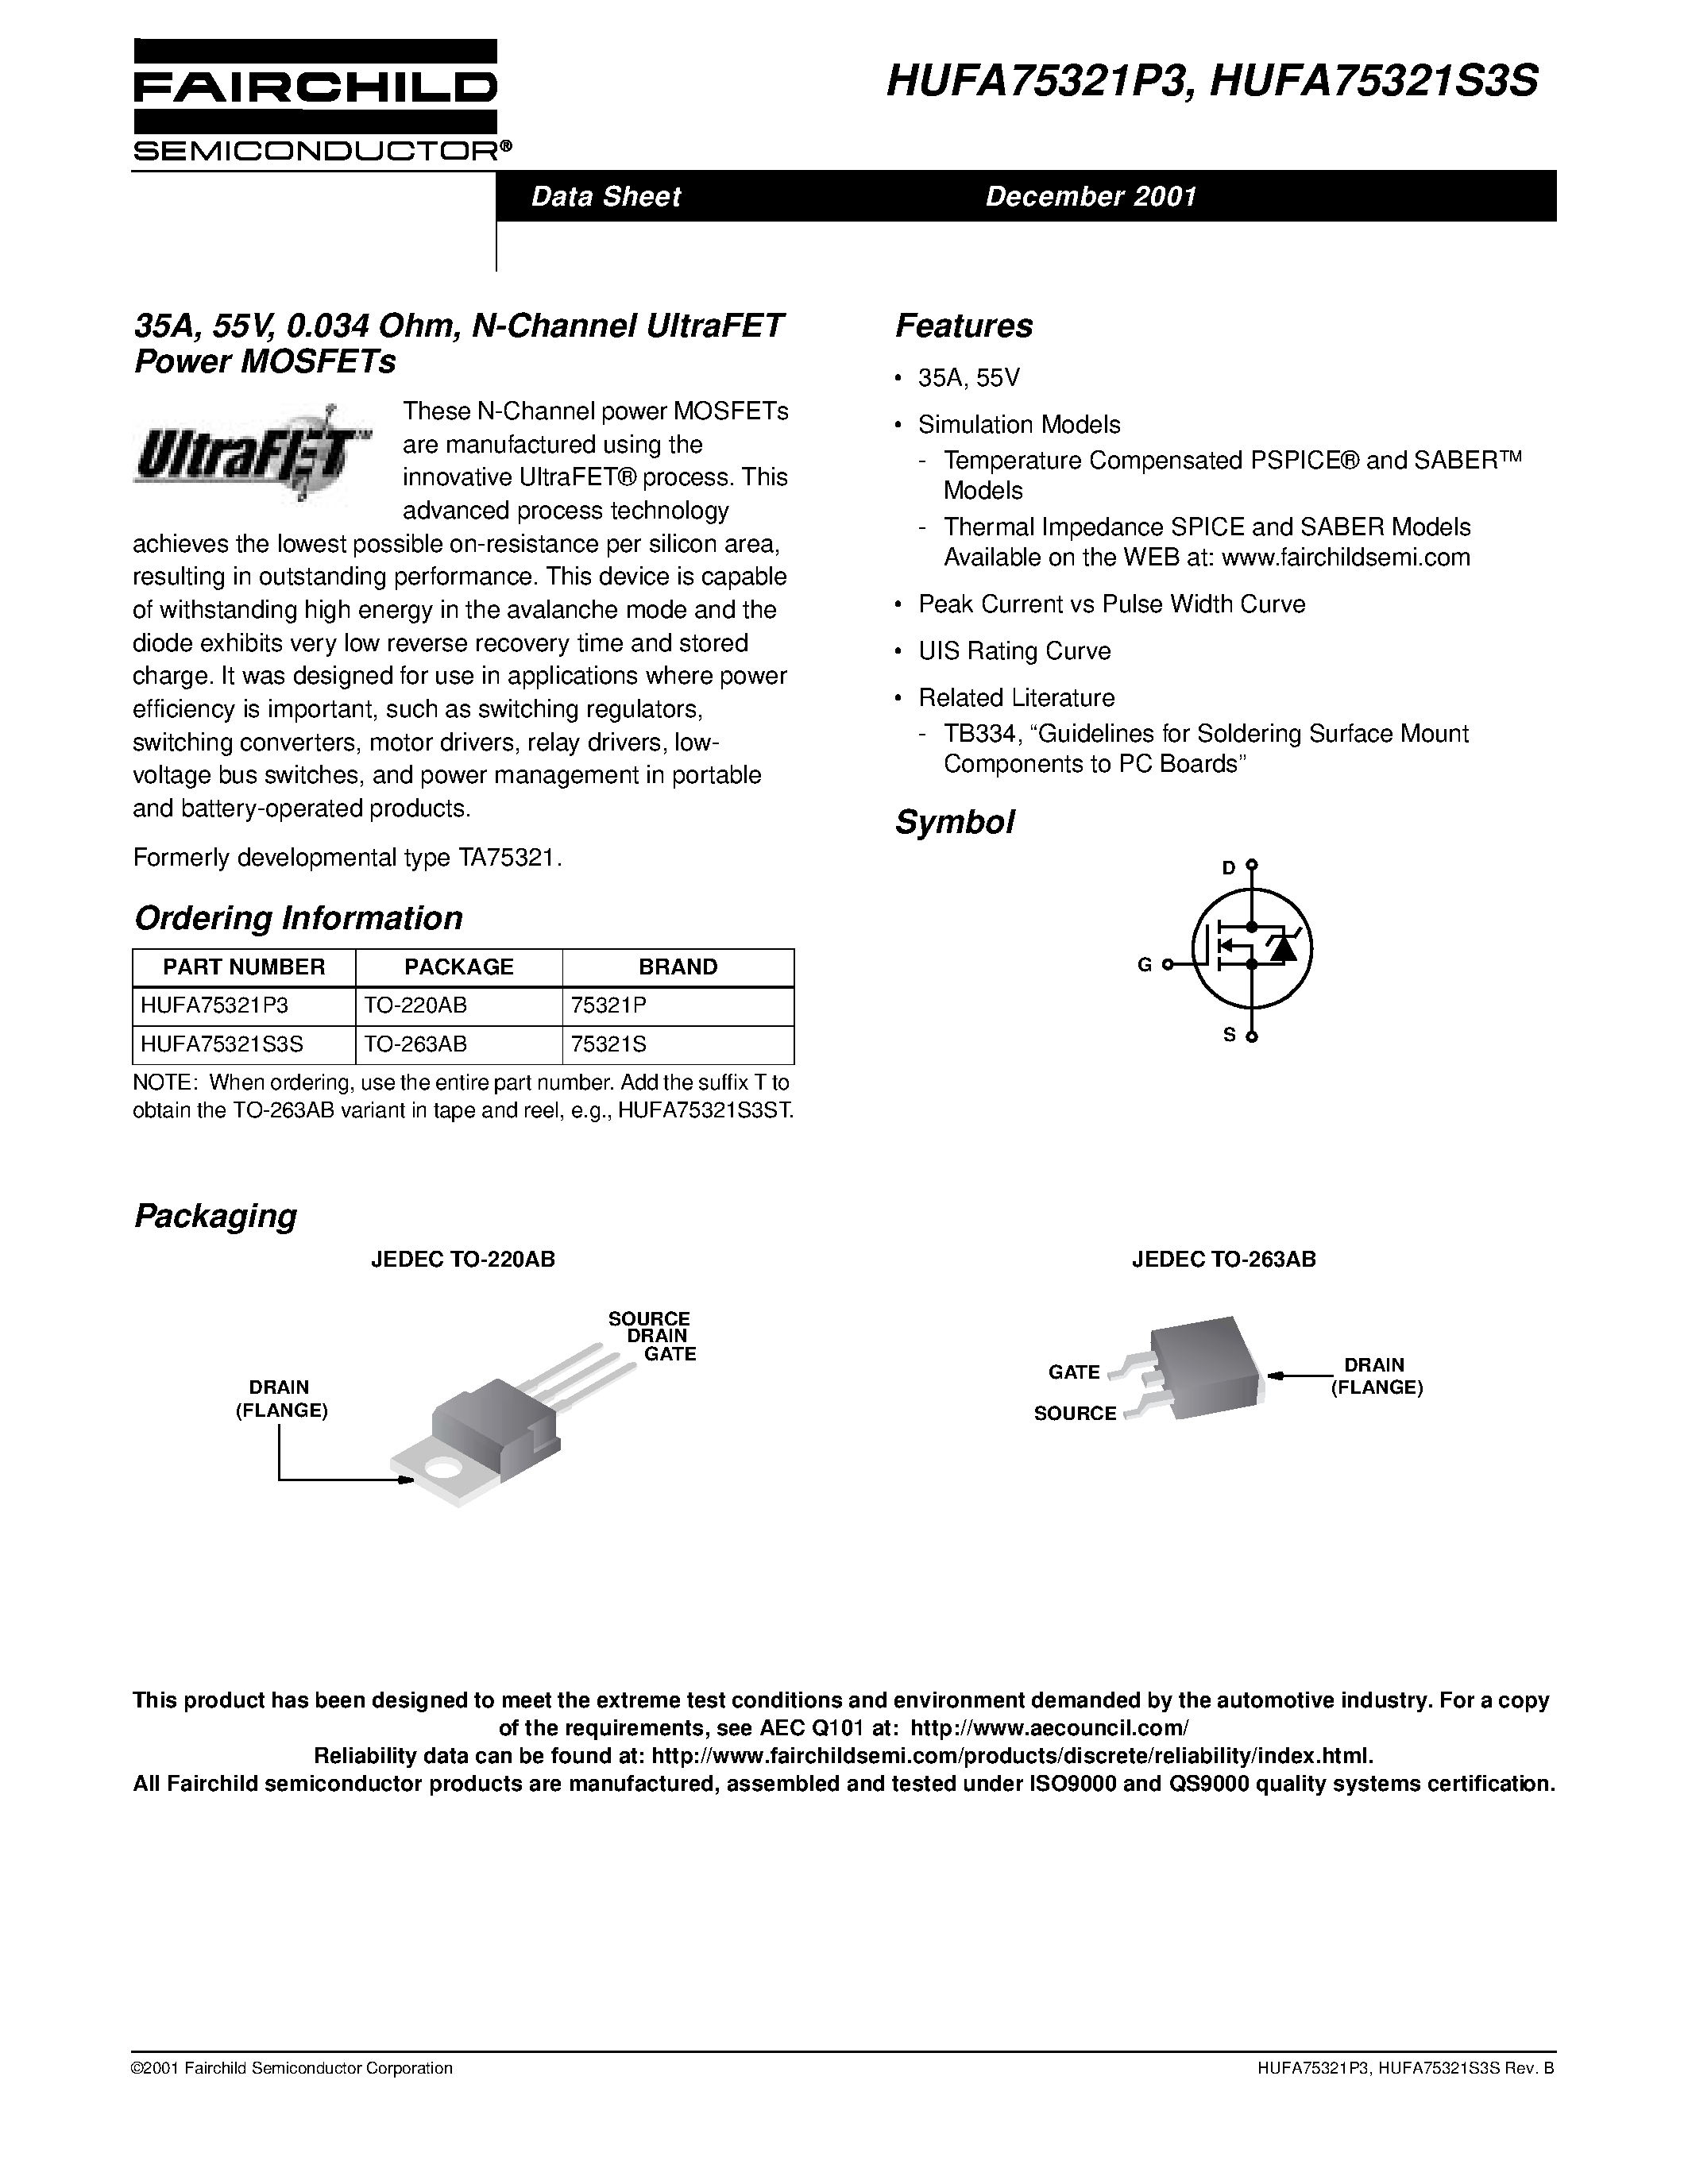 Datasheet HUFA75321P3 - 35A/ 55V/ 0.034 Ohm/ N-Channel UltraFET Power MOSFETs page 1